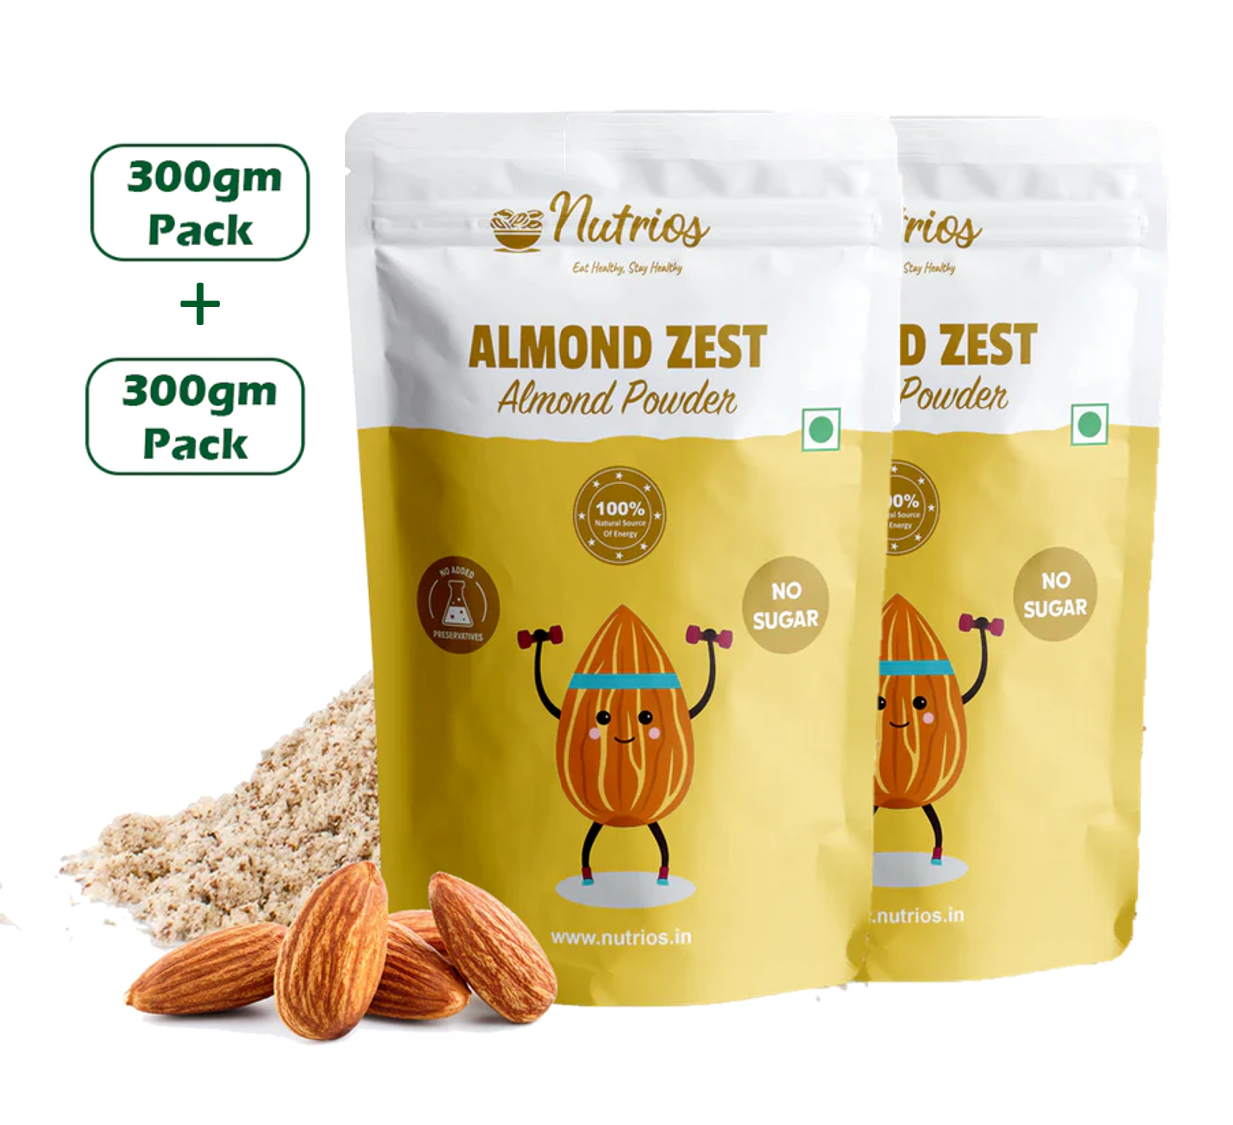 Nuts'n More Organic Almond Infused Whey Protein, Packaging Type: Pouch at  Rs 2299/piece in Delhi